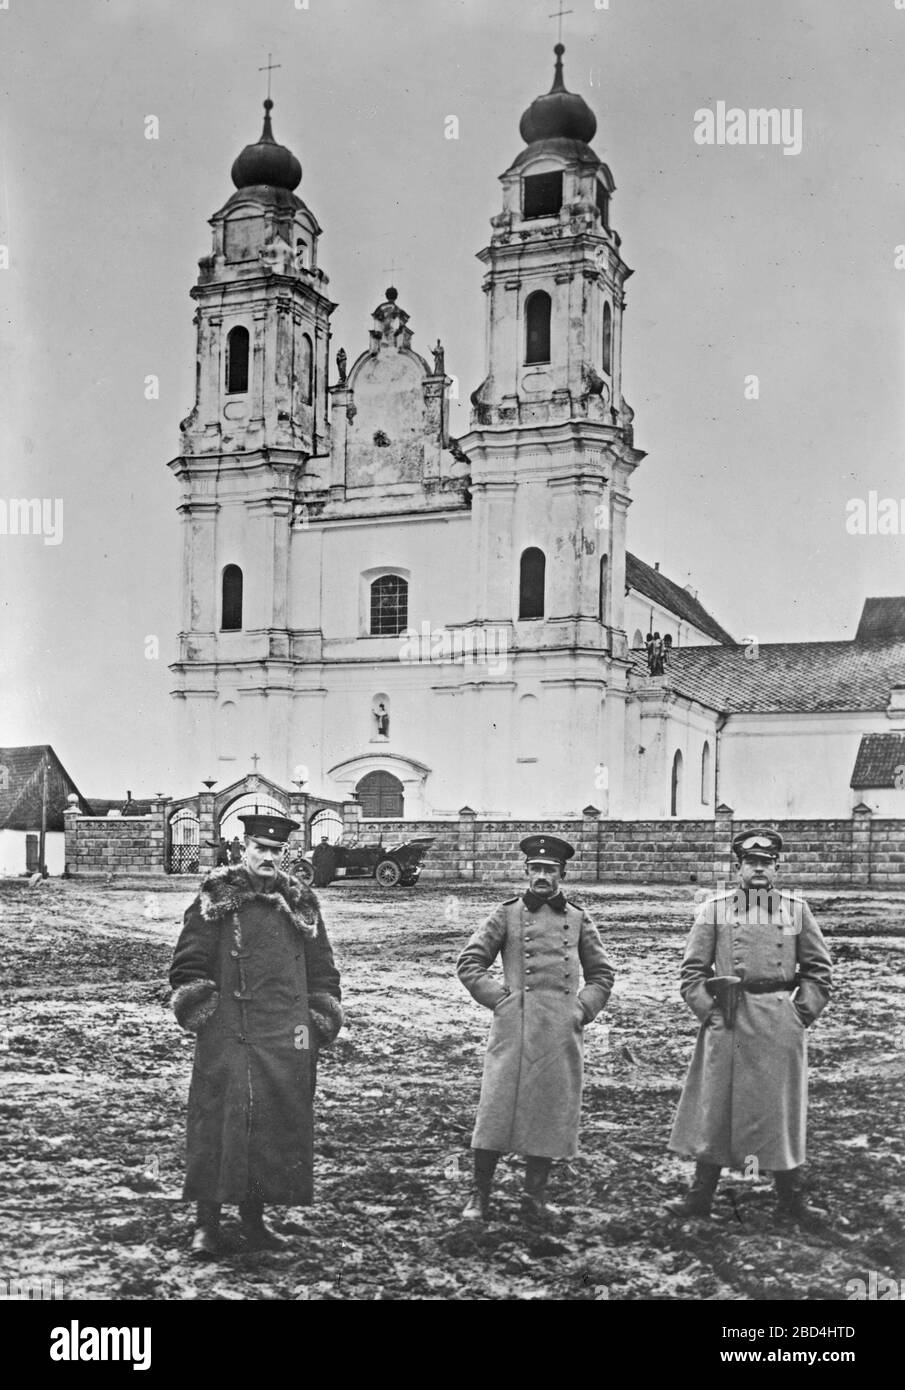 German soldiers outside a Russian church in Suwalki, Poland during World War I ca. 1914-1915 Stock Photo